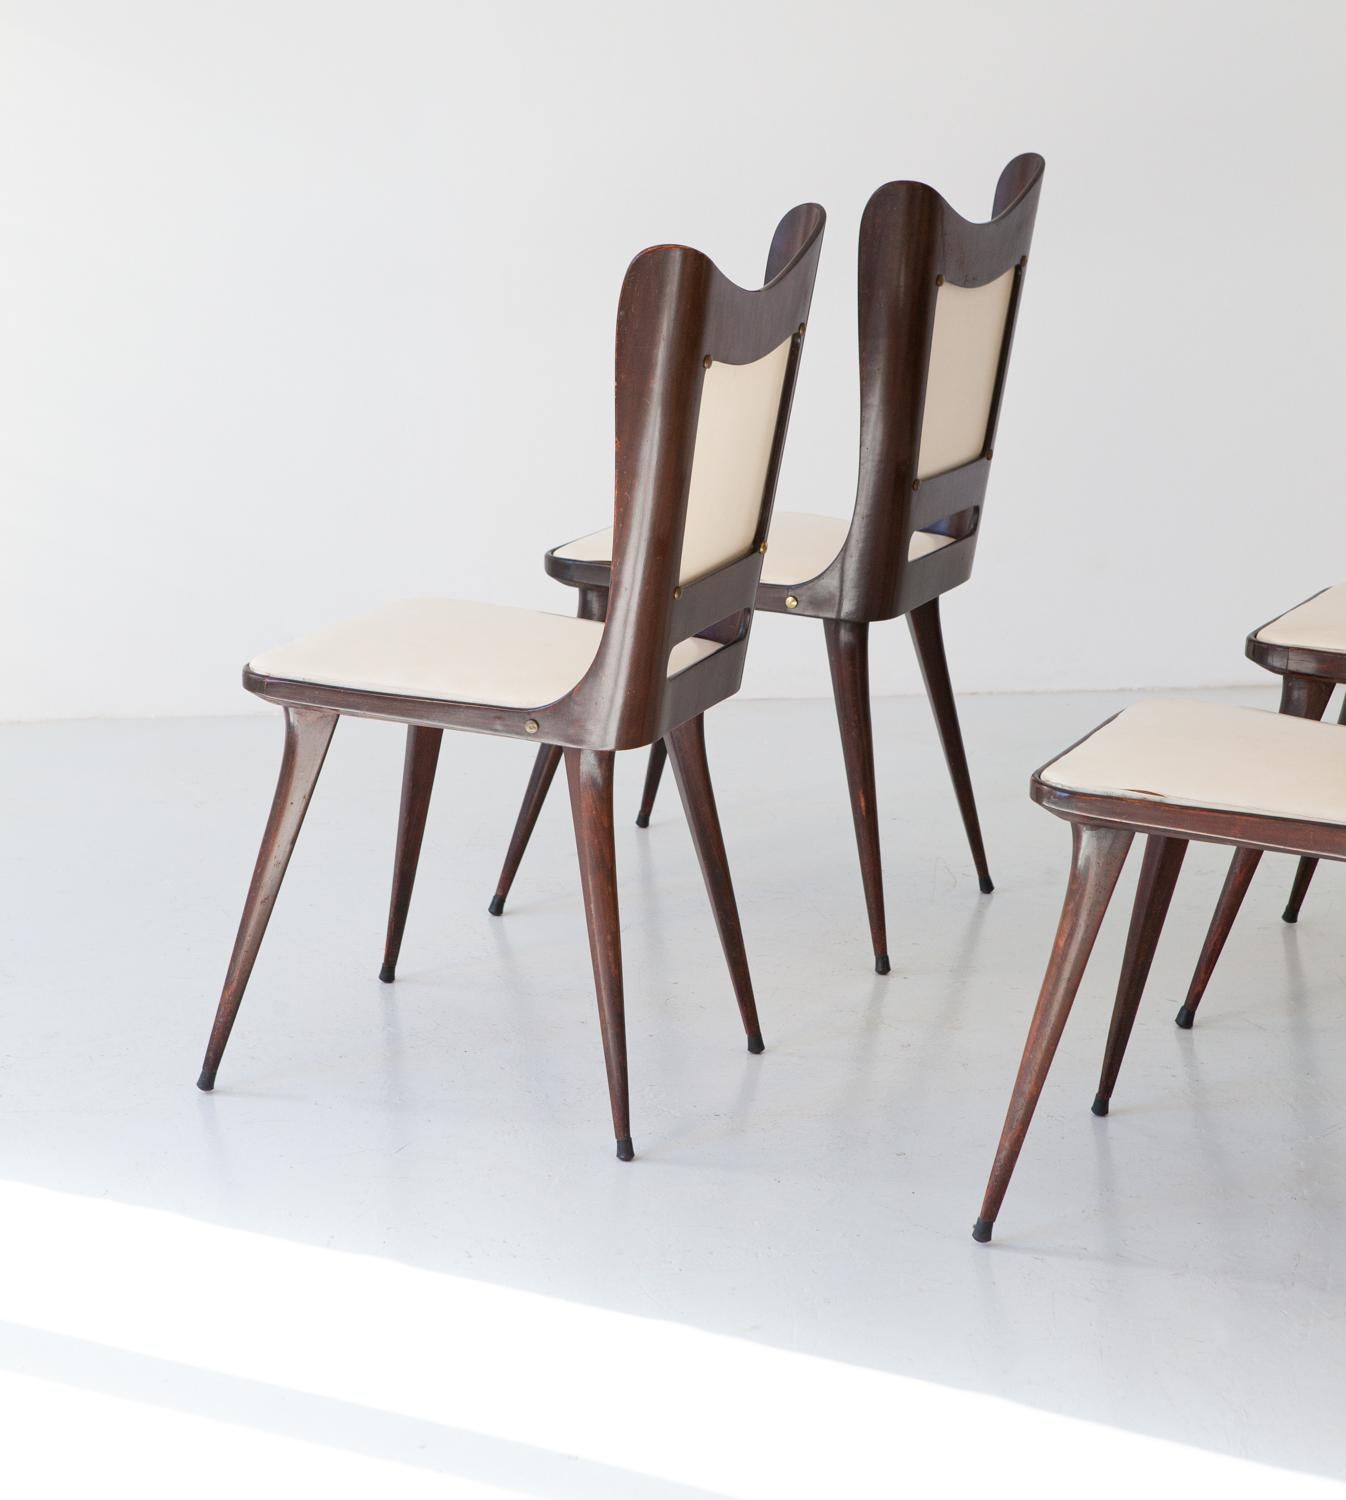 Faux Leather Set of Four Italian Beige Skai and Wood Dining Chairs, 1950s For Sale